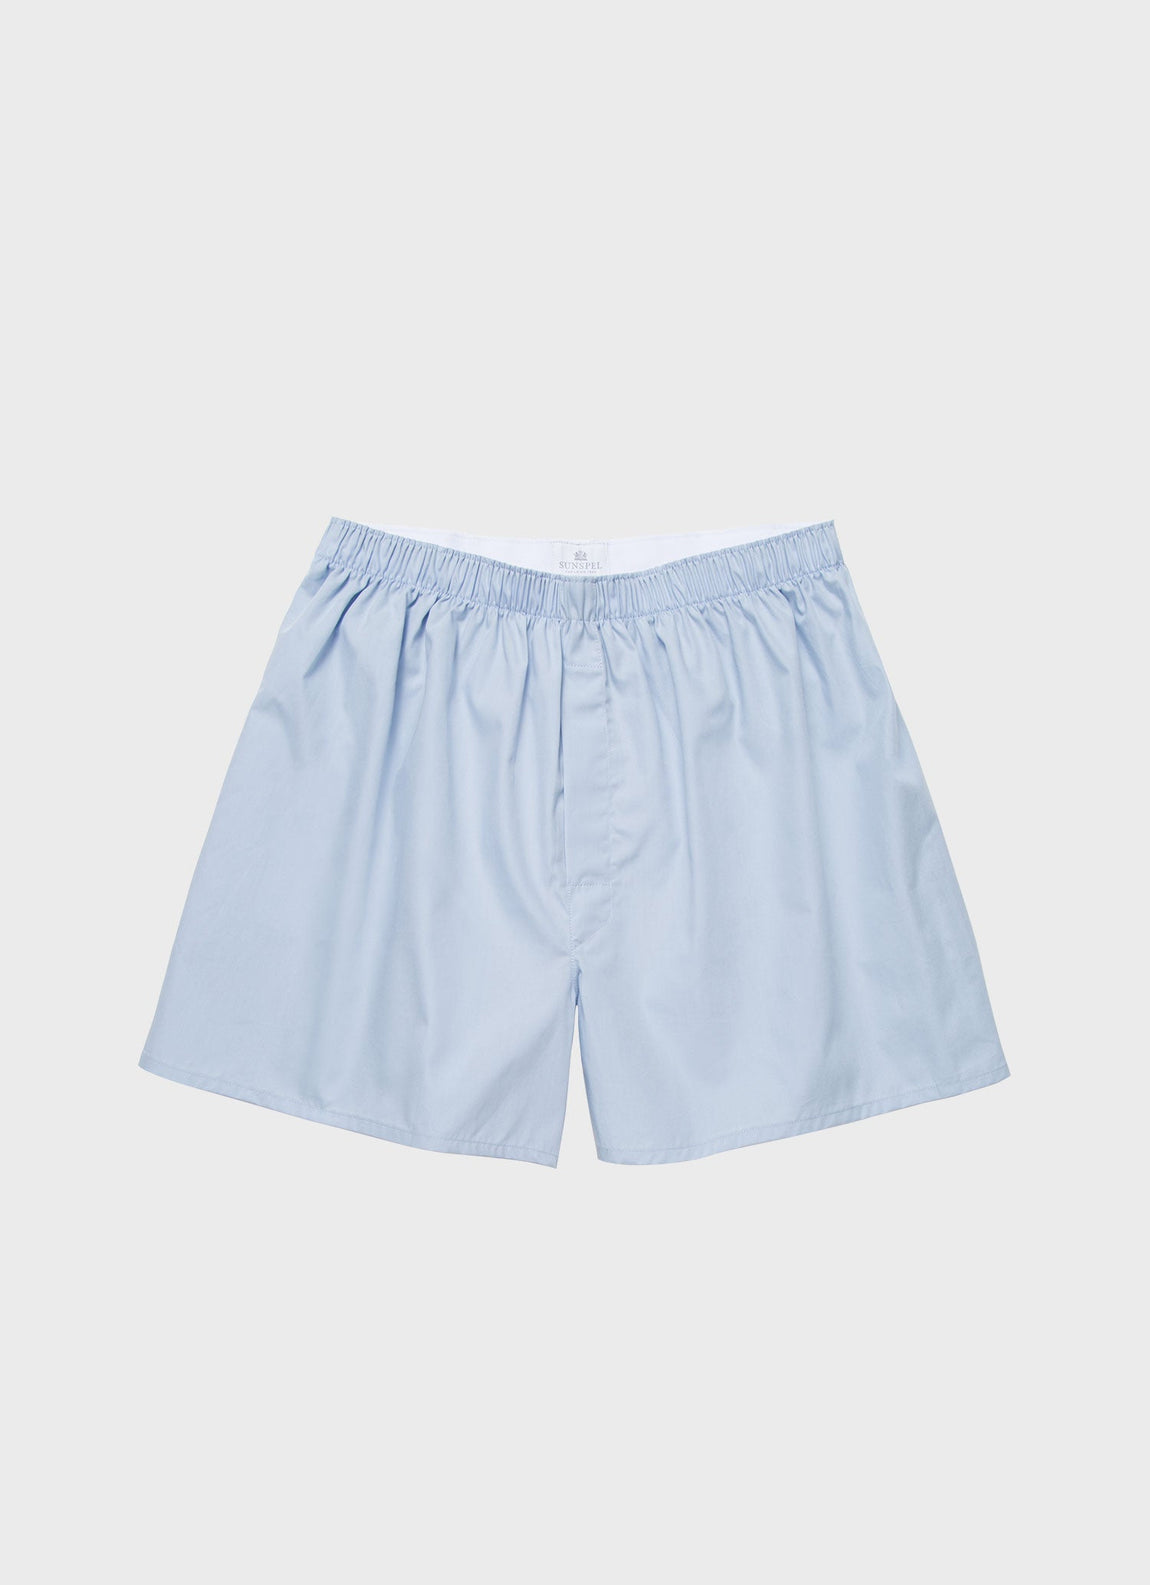 Boys' Ribbed Cotton Boxer Shorts - 2-Pack 